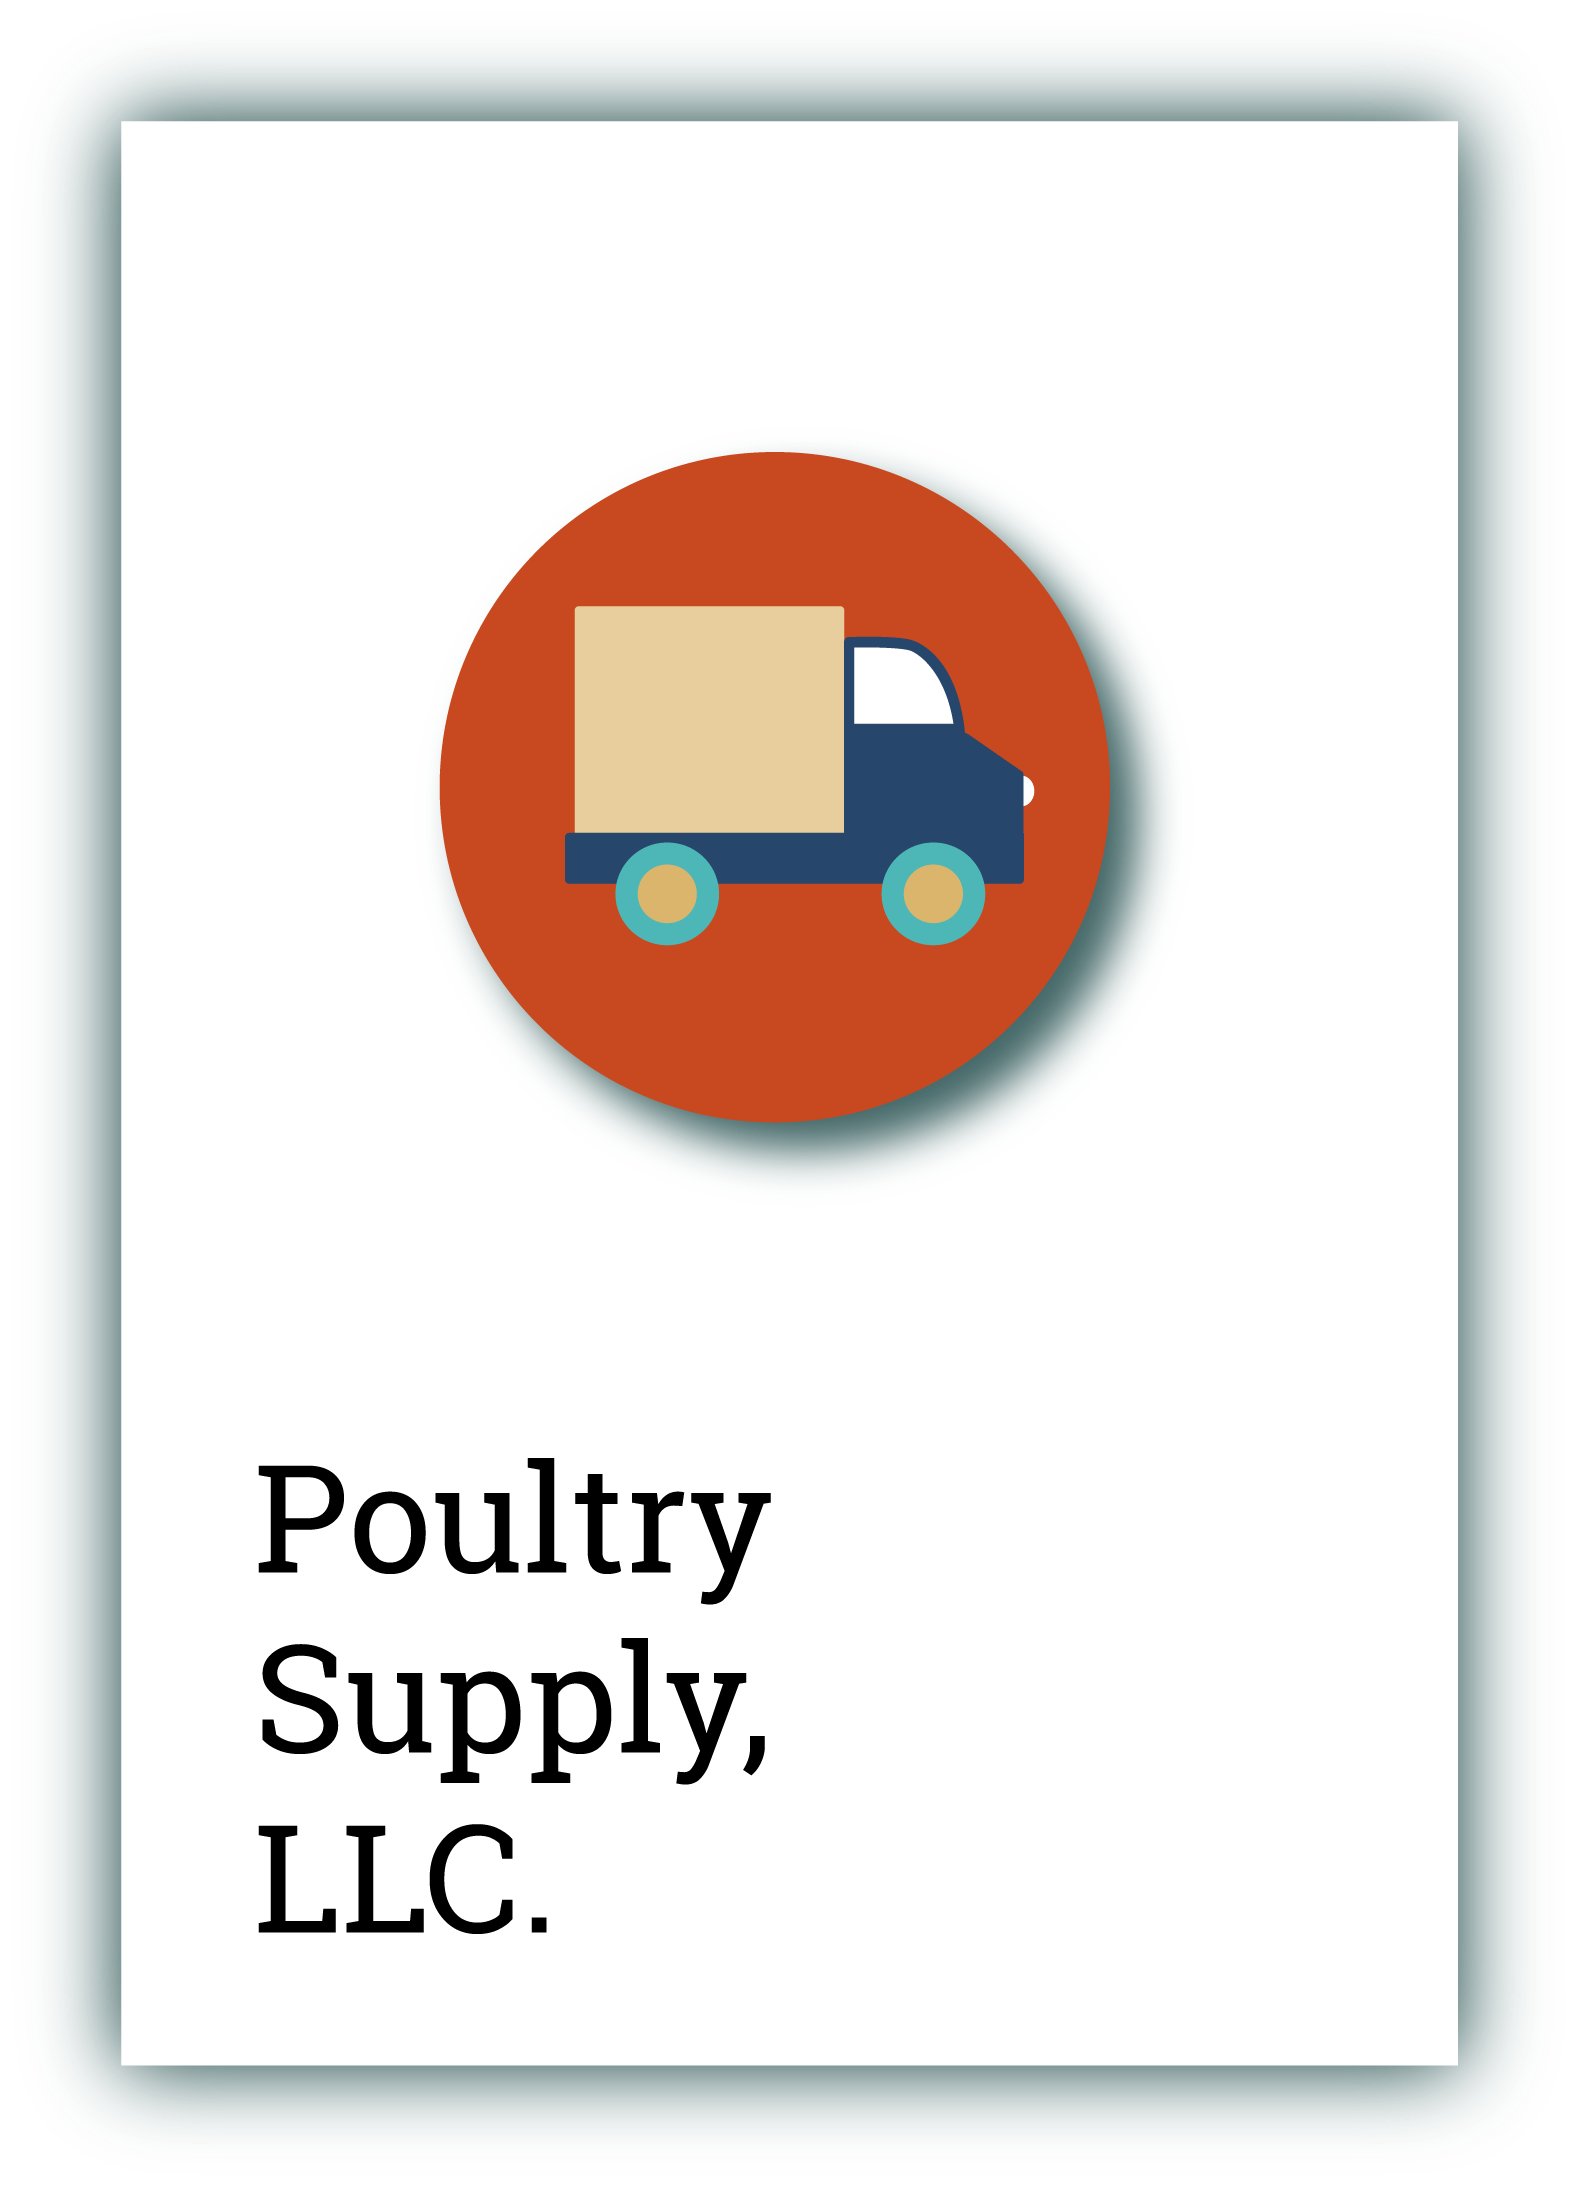 Poultry Supply, LLC